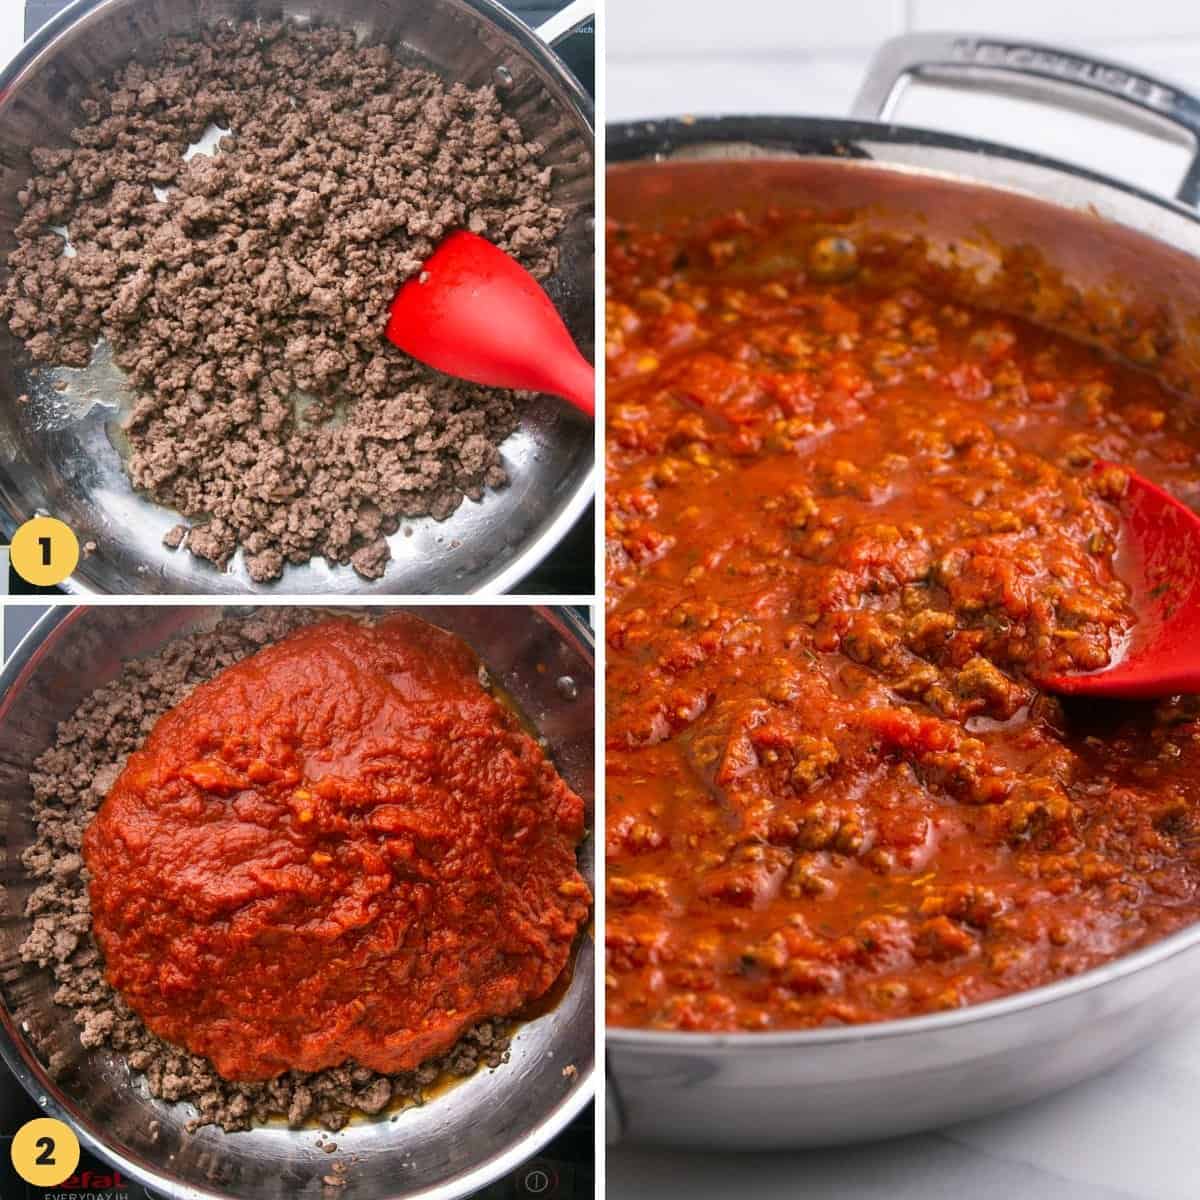 A collage of 3 images showing how to make meatsauce for ravioli lasagna